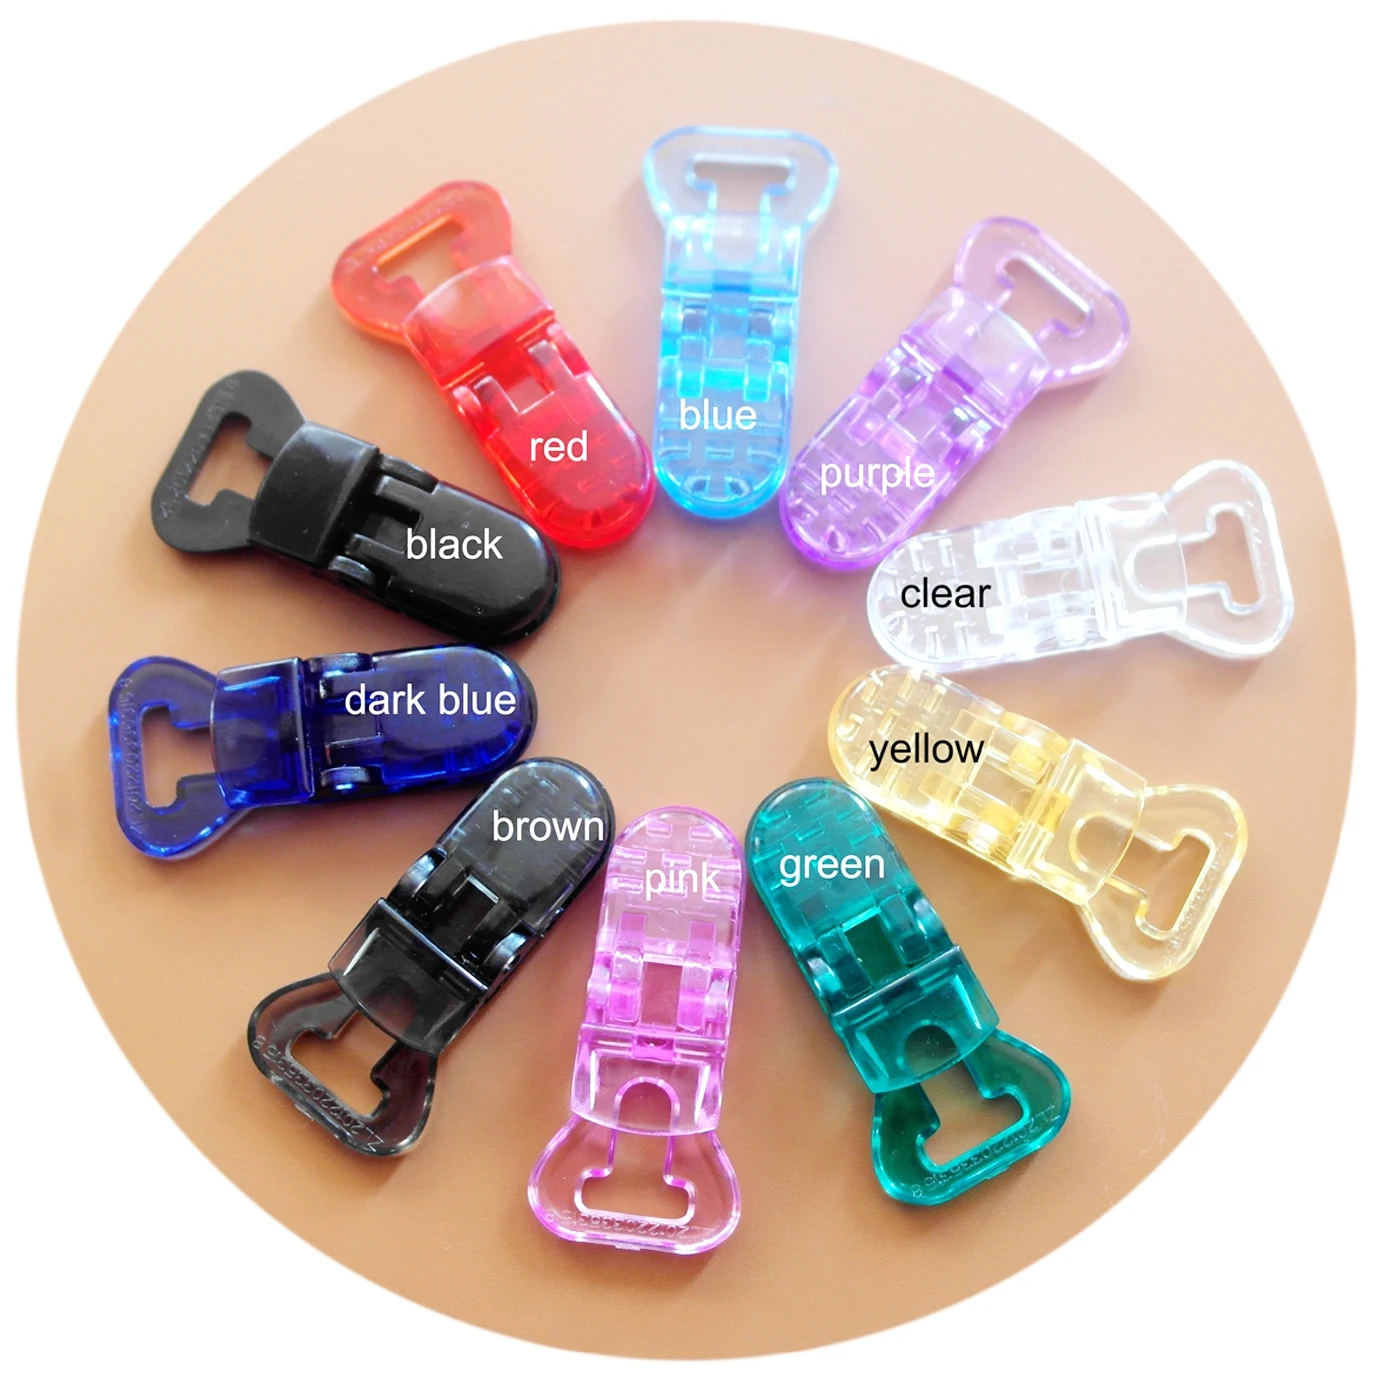 Free Shipping 500pcs Clear 10MM Plastic T Clips For Pacifier Soother/Dummy/Nuk/MAM/Bib/Toy Holder/Suspender,Mix 10 Colors